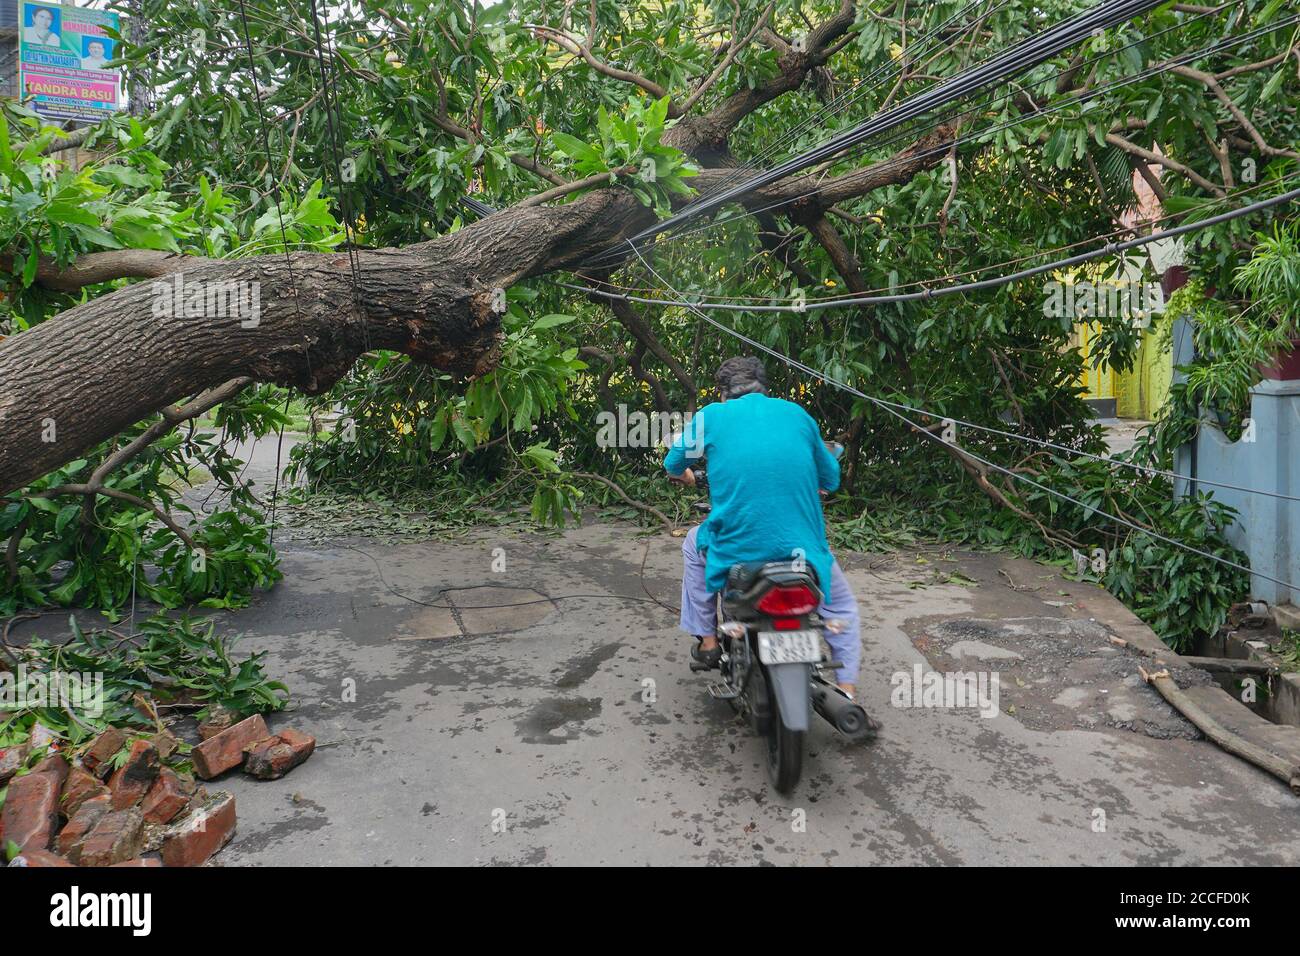 Howrah, West Bengal, India - 21st May 2020 : Super cyclone Amphan uprooted tree which fell and blocked road. Citizen passing through dangerously. Stock Photo